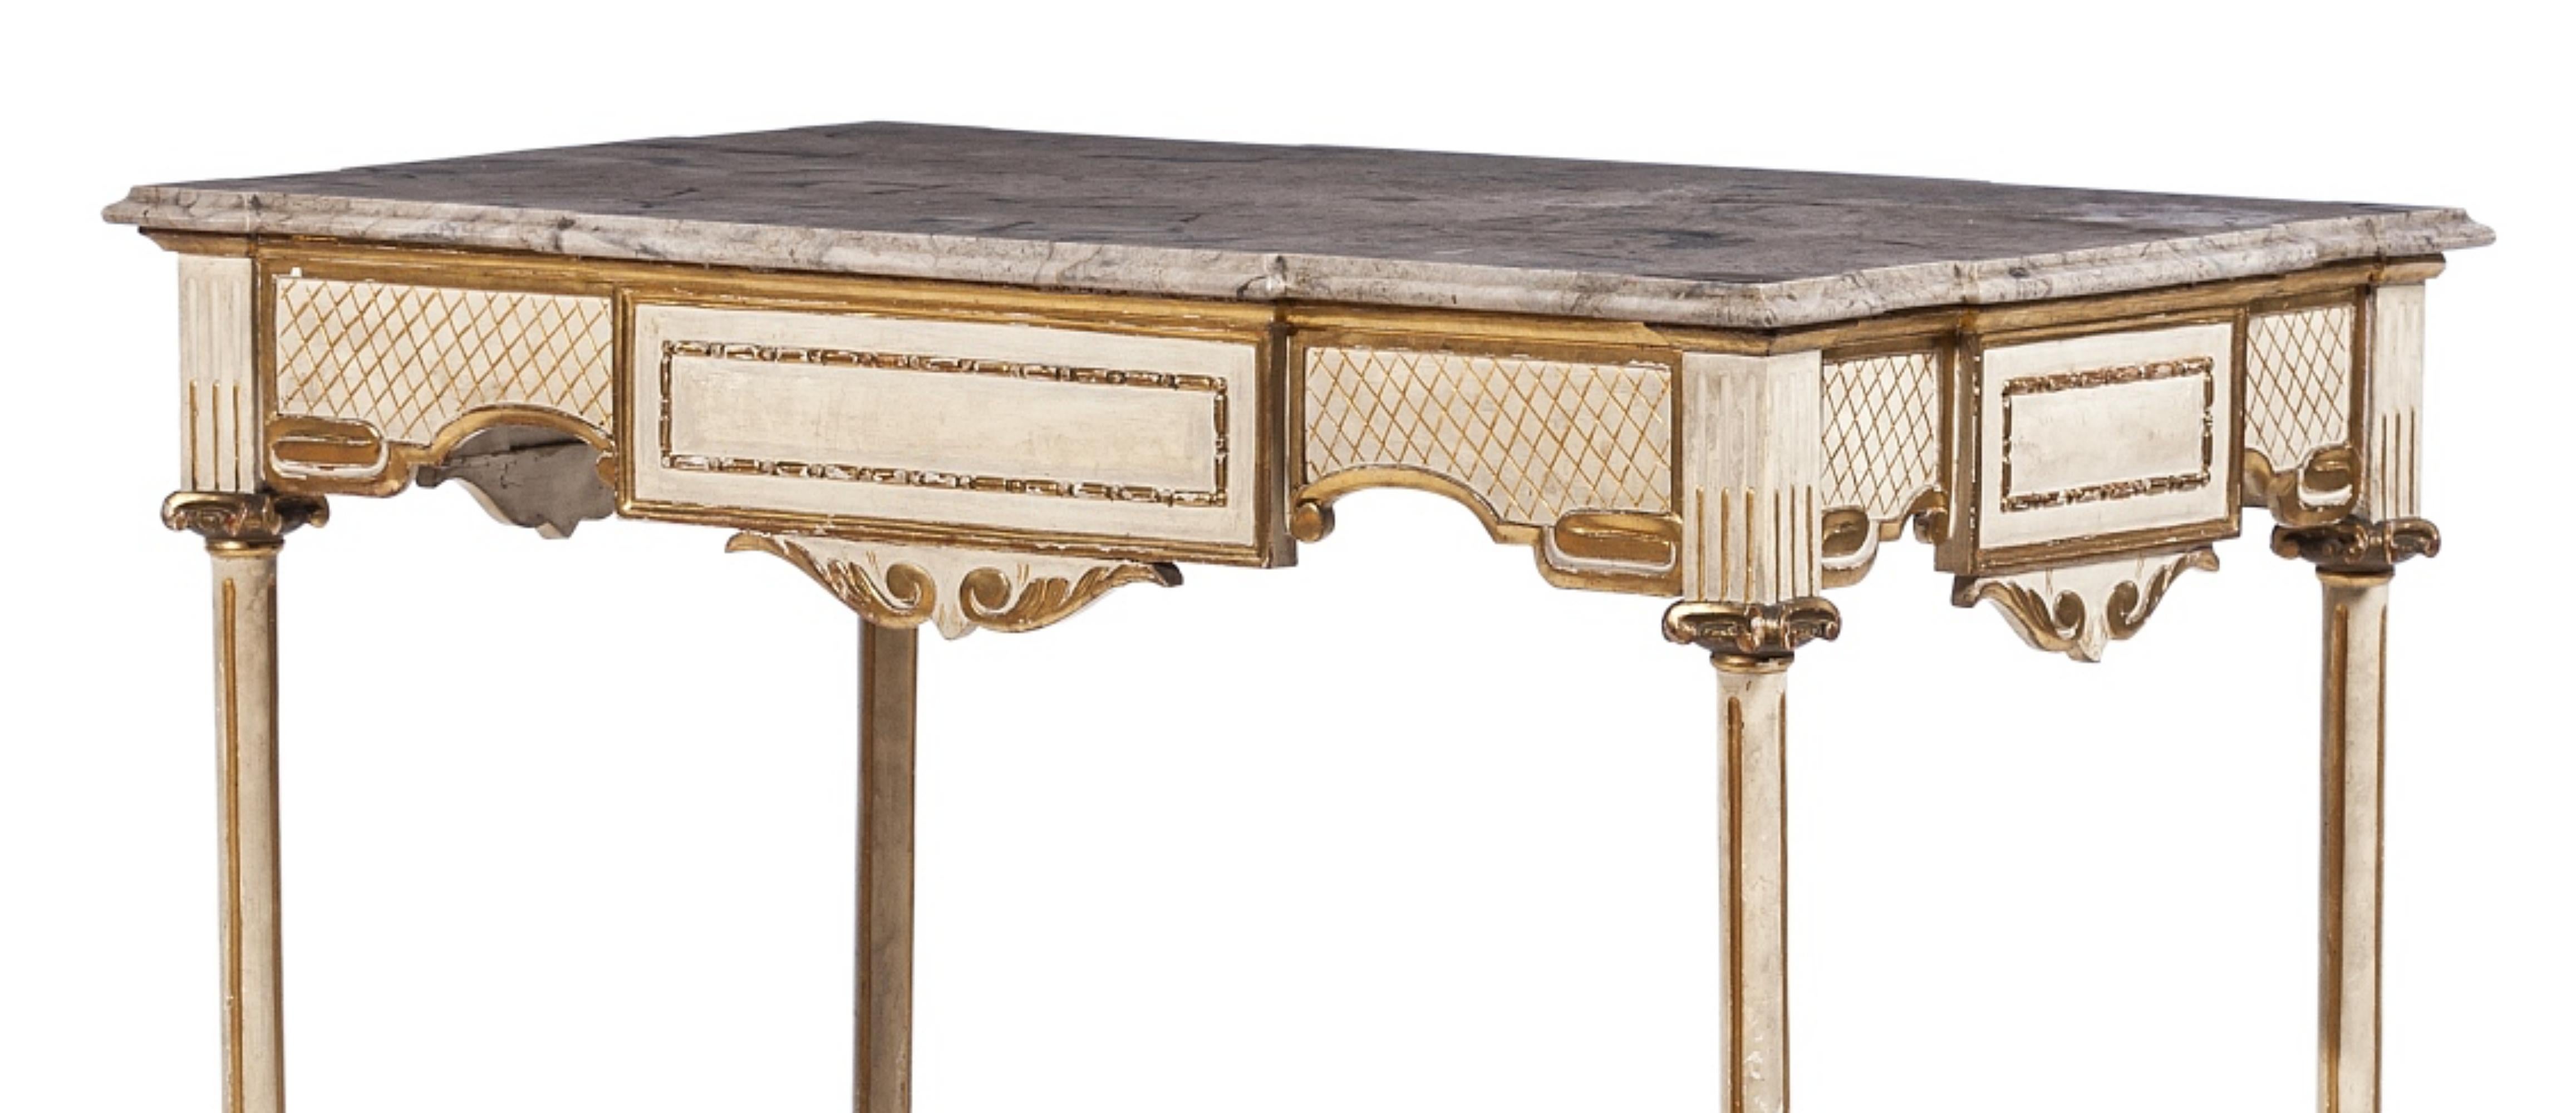 Baroque Center Table French, Early 19th Century Louis XV Style For Sale